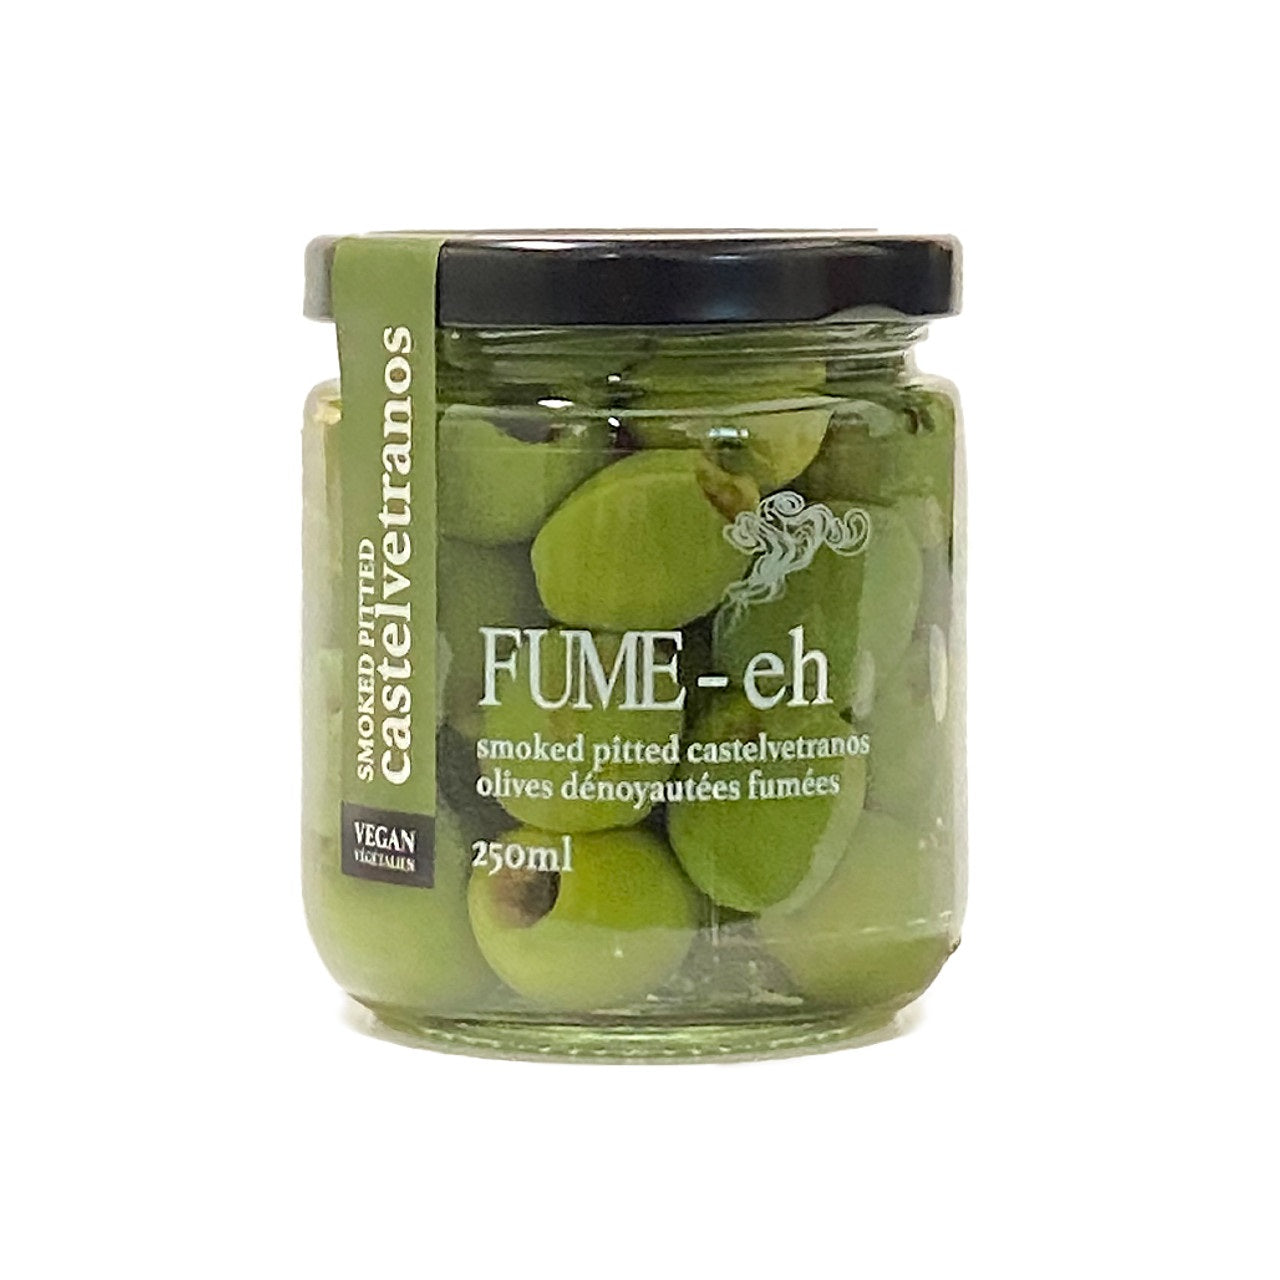 Fume-Eh Gourmet - Smoked Pitted Castelvetrano Olives